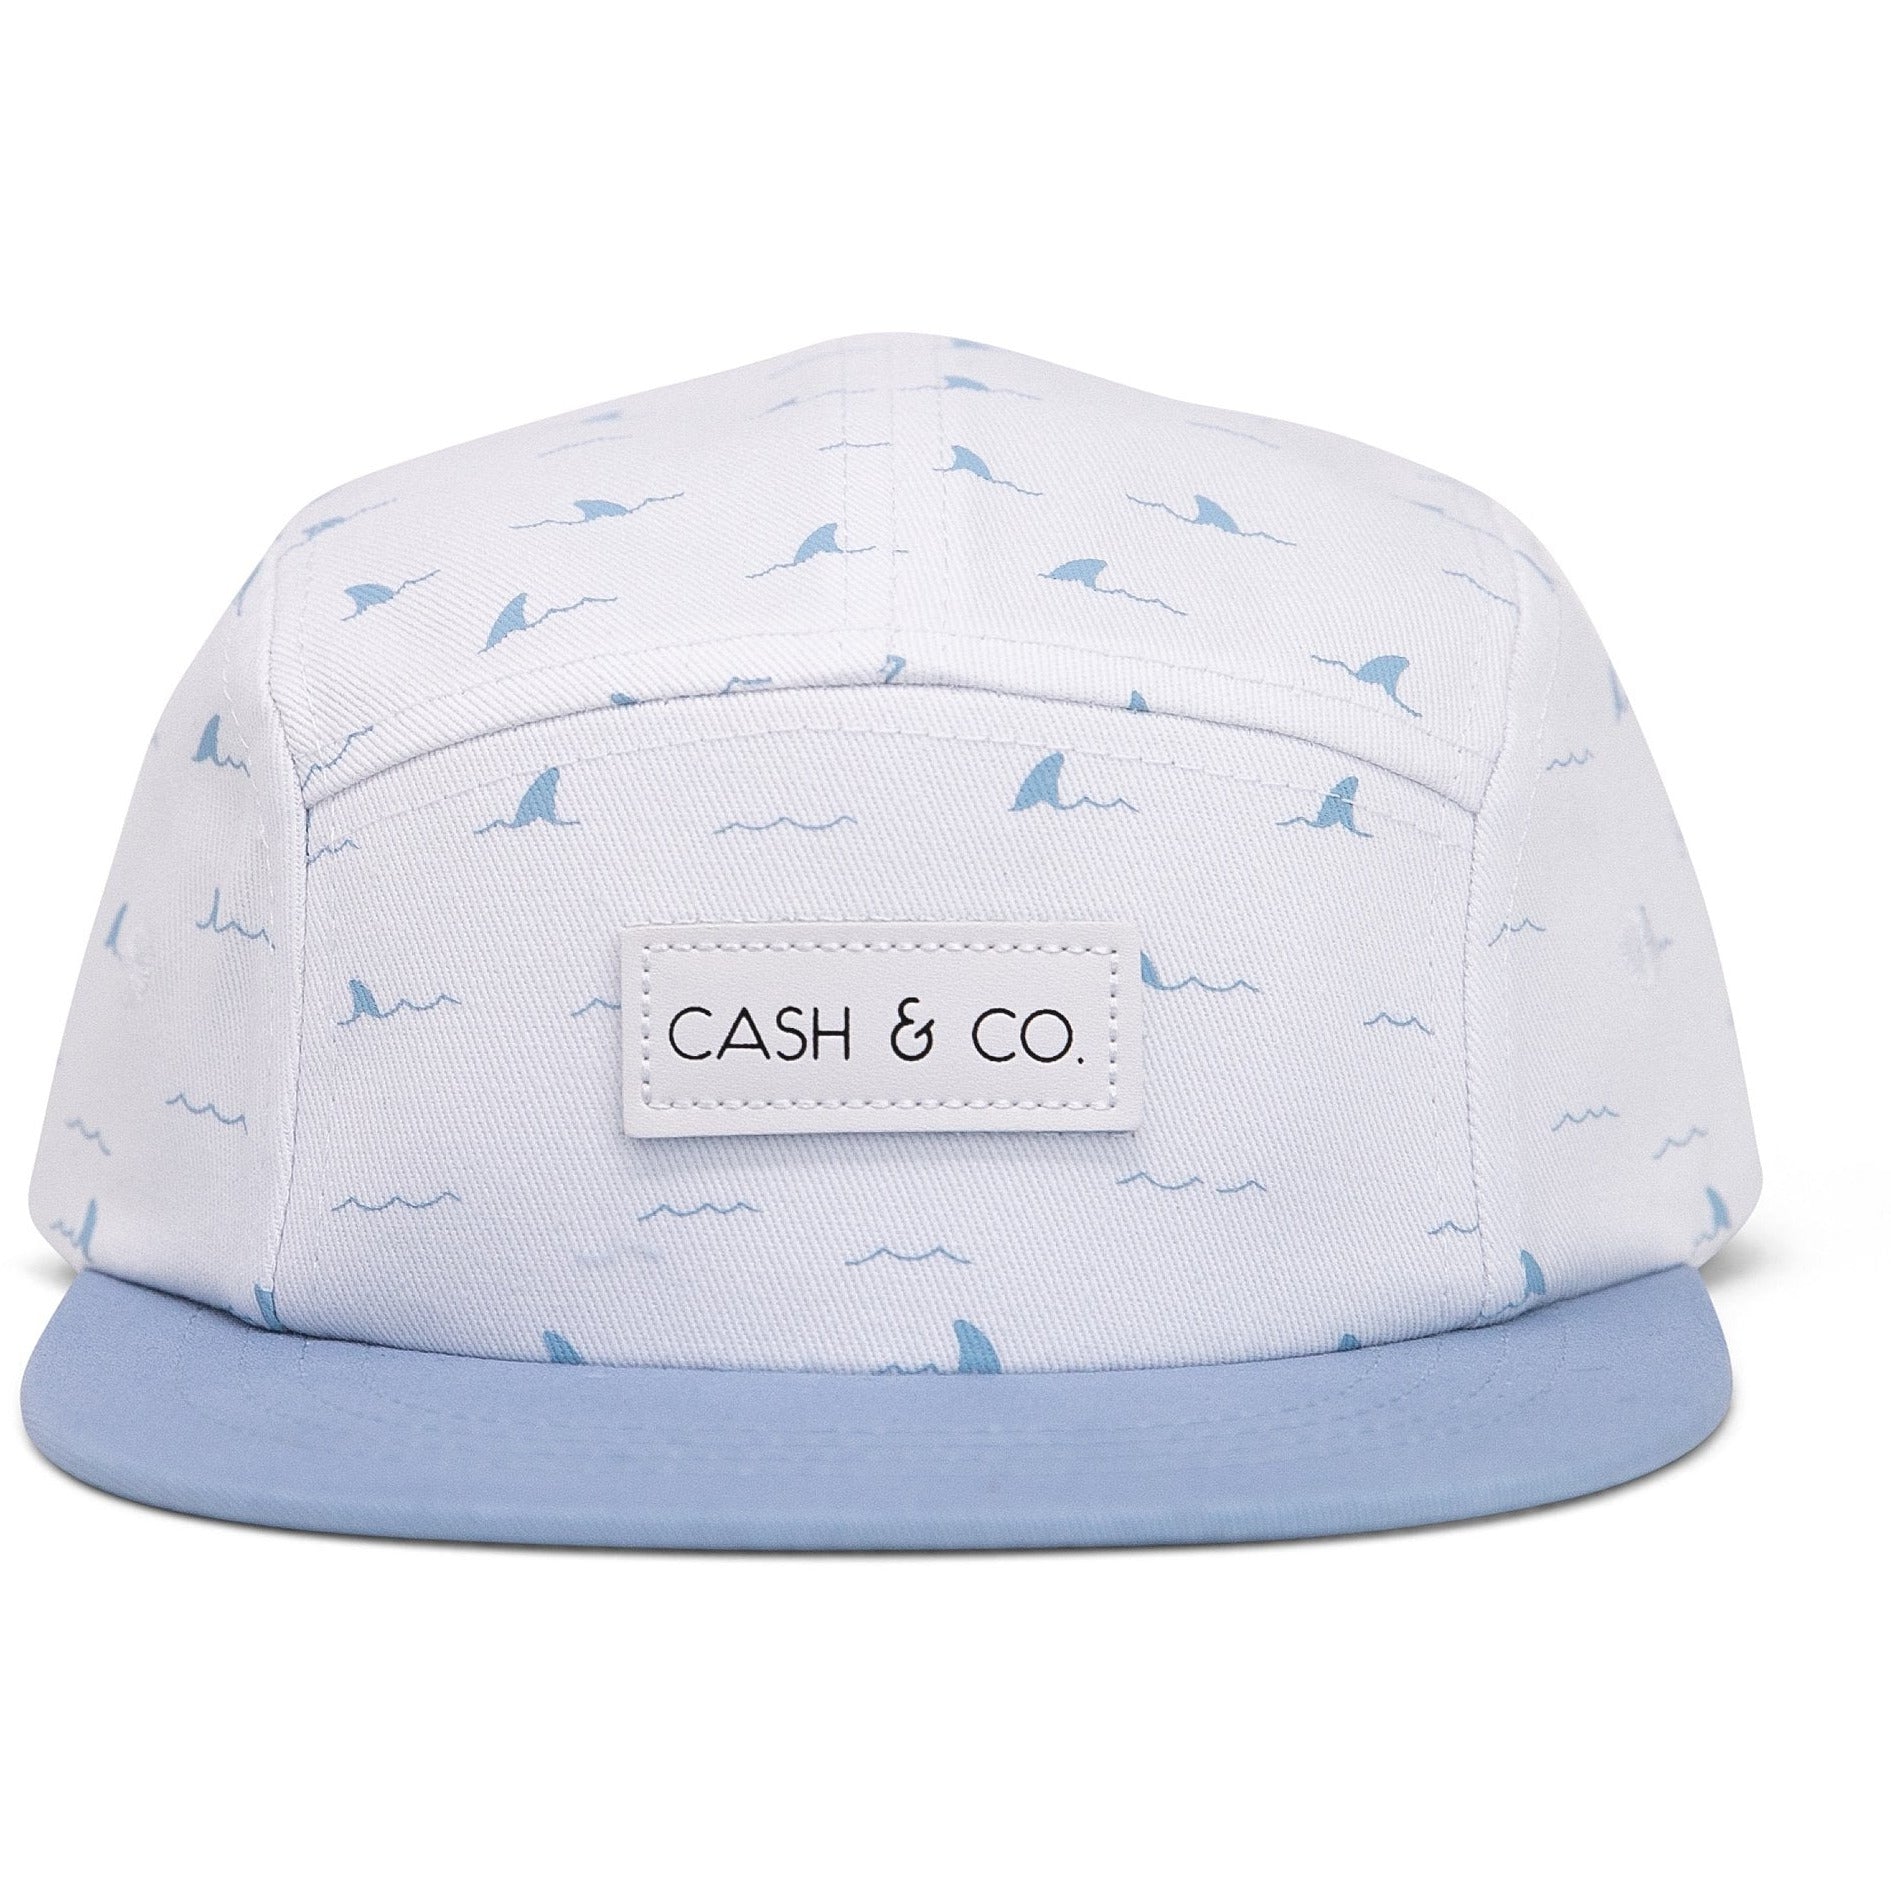 cash & co. the great white hat